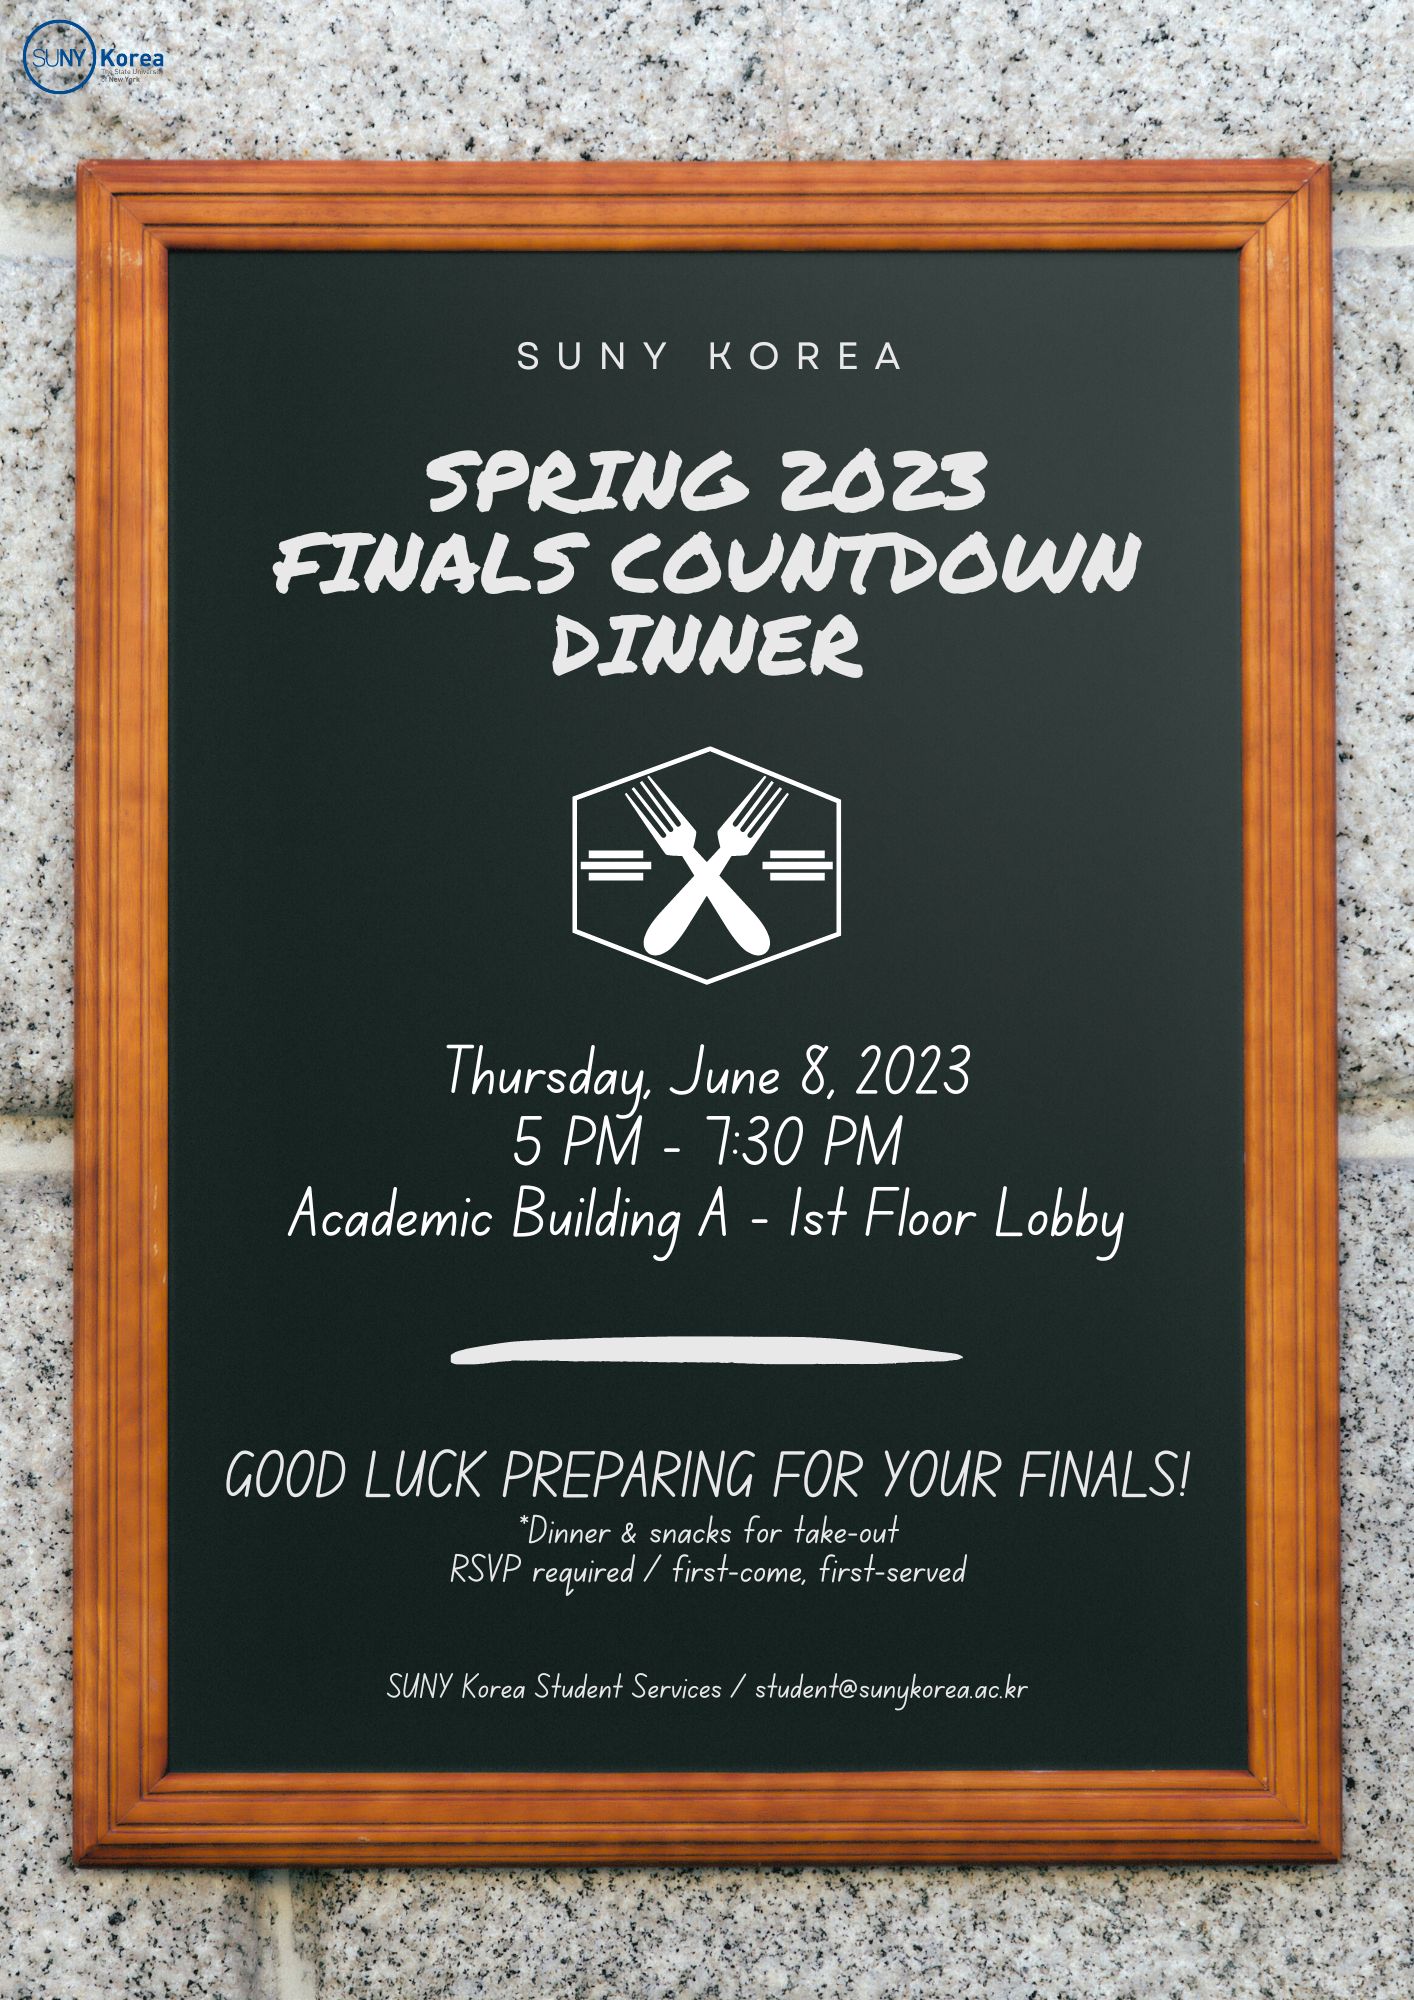 SUNY KOREA SPRING 2023 FINALS COUNTDOWN DINNER. Thursday, June8, 2023 5PM-7:30PM Academic Building A-Ist Floor Lobby. GOOD LUCK PREPARING FOR YOUR FINALS! *Dinner & snacks for take-out RSVP required/first-come, first-served SUNY Korea Student Services/student@sunykorea.ac.kr